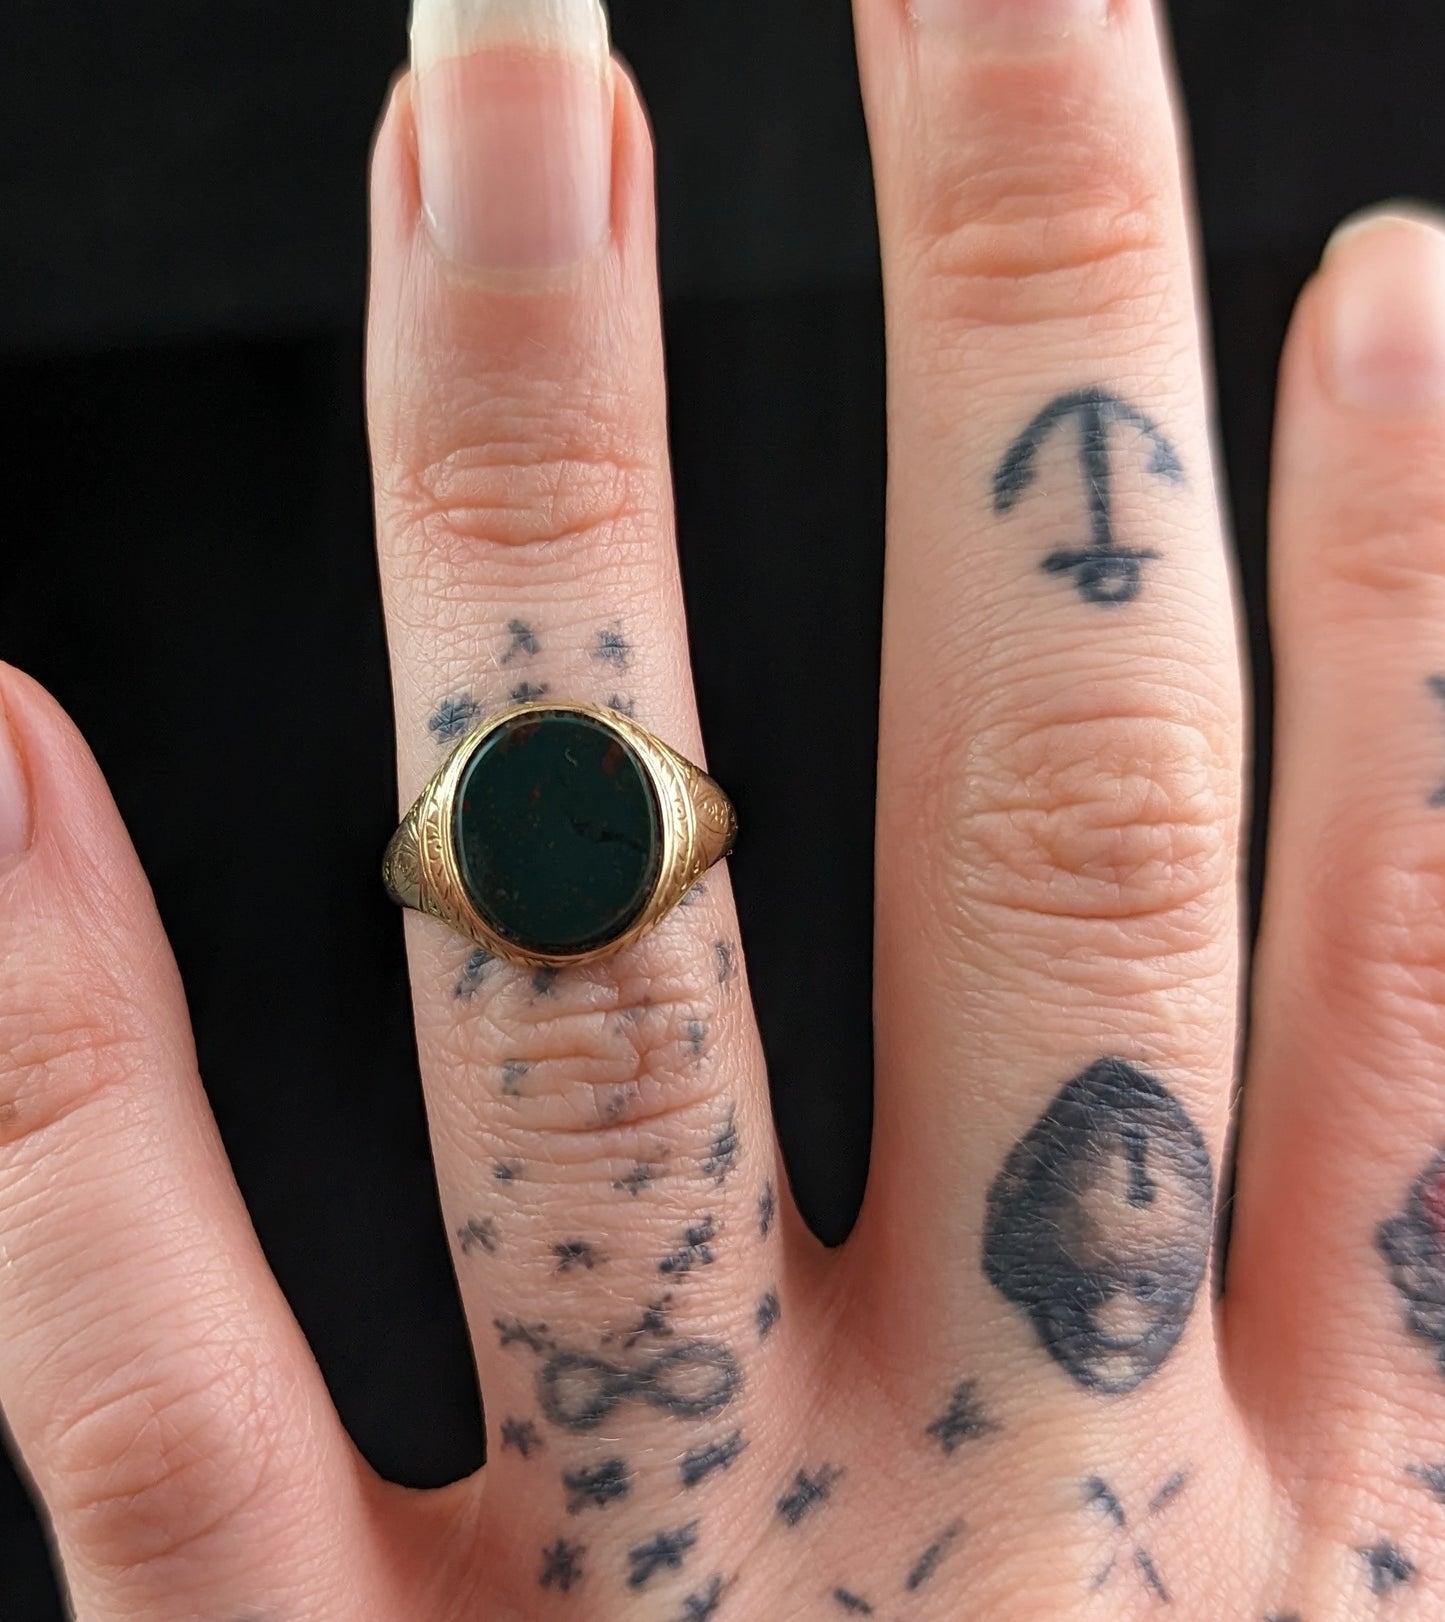 Antique Victorian 15ct gold Bloodstone signet ring, Engraved